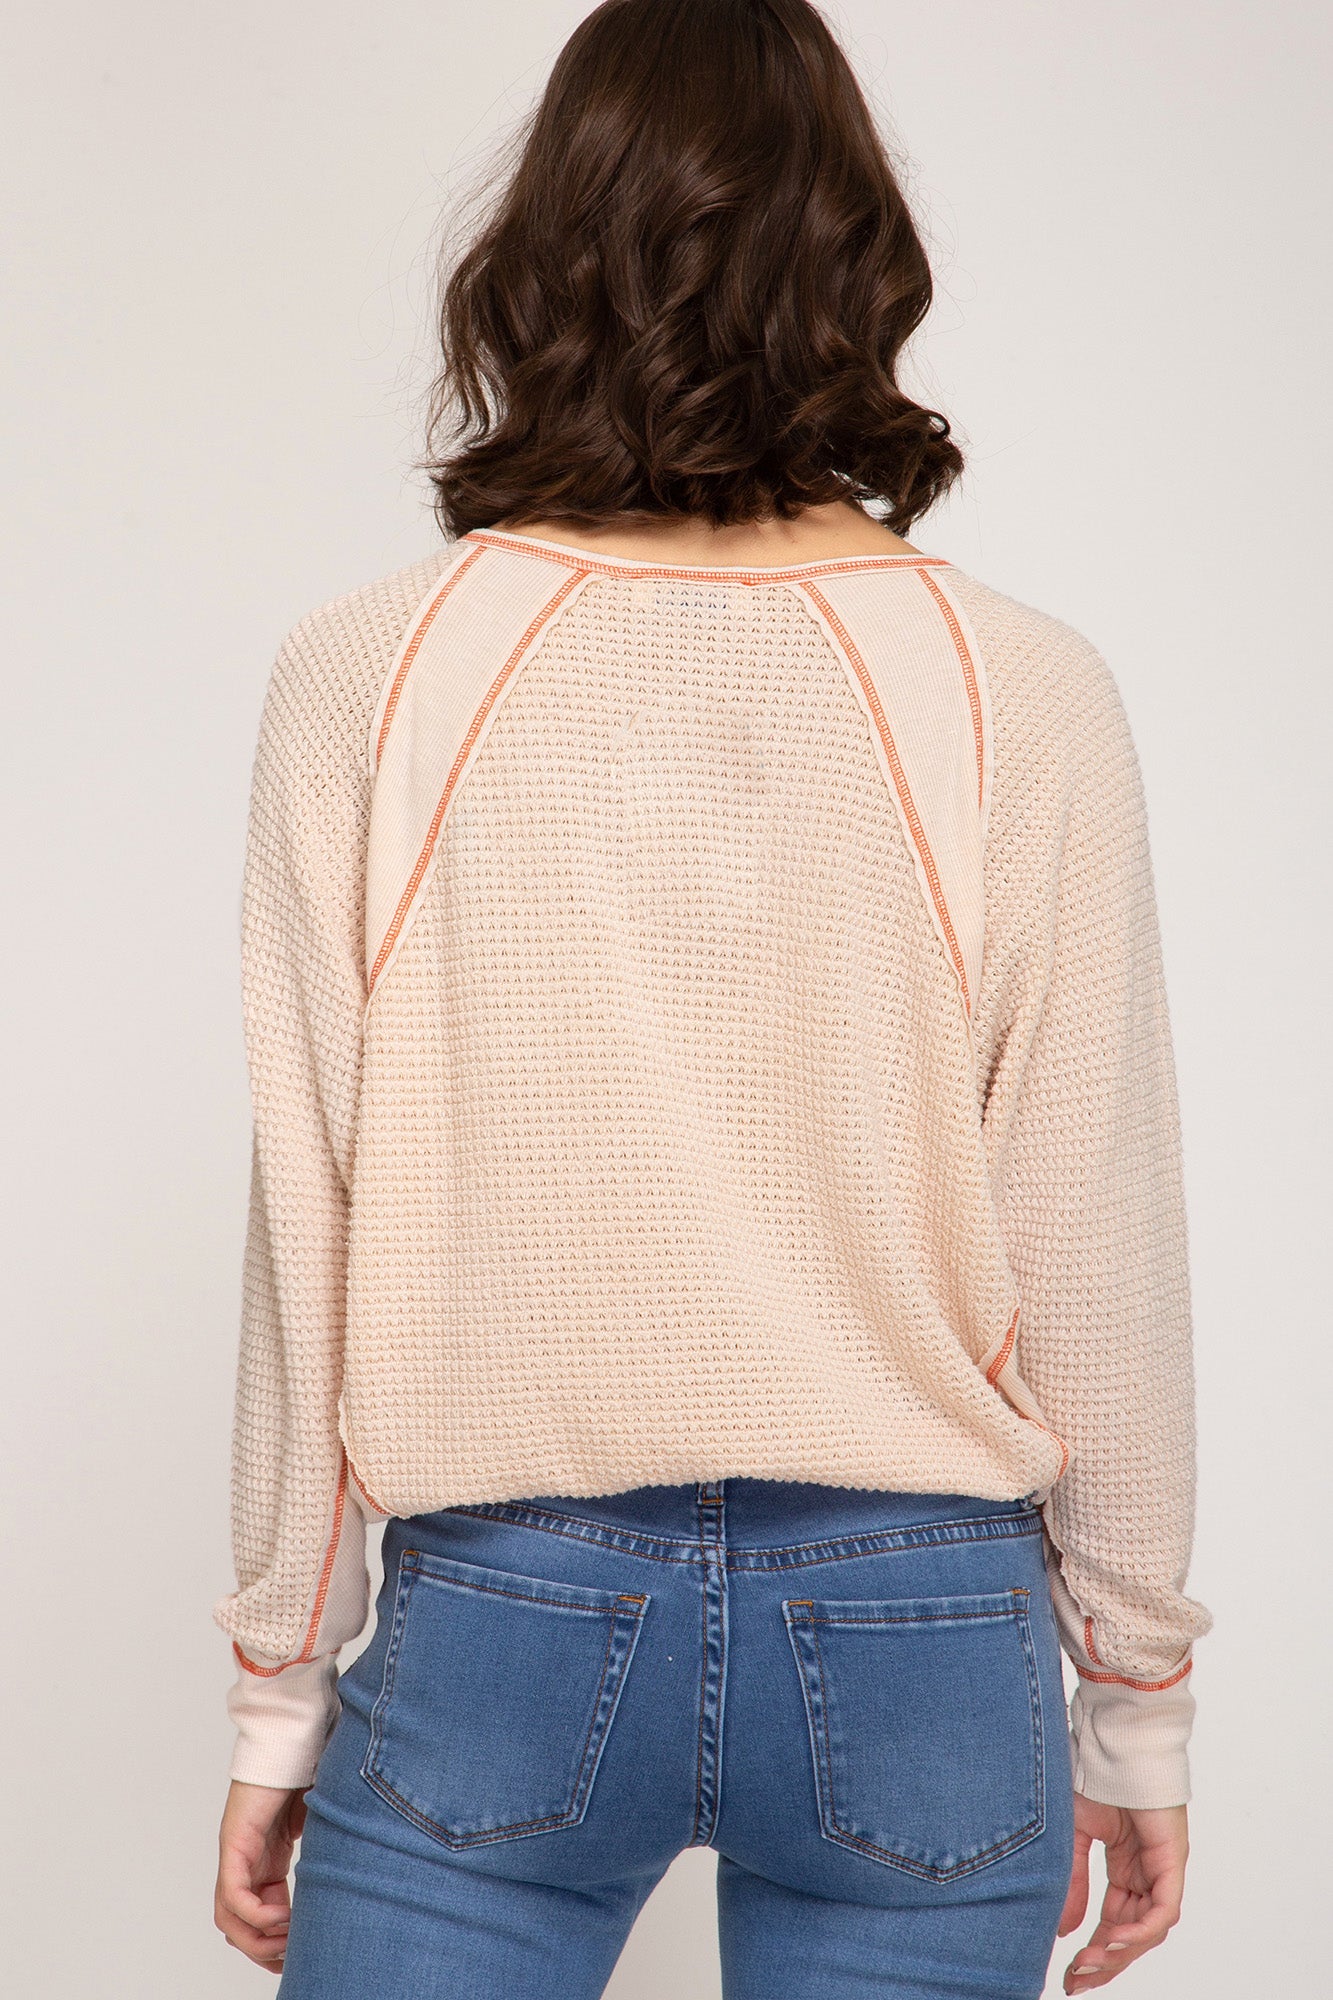 SS Batwing Knit Top!